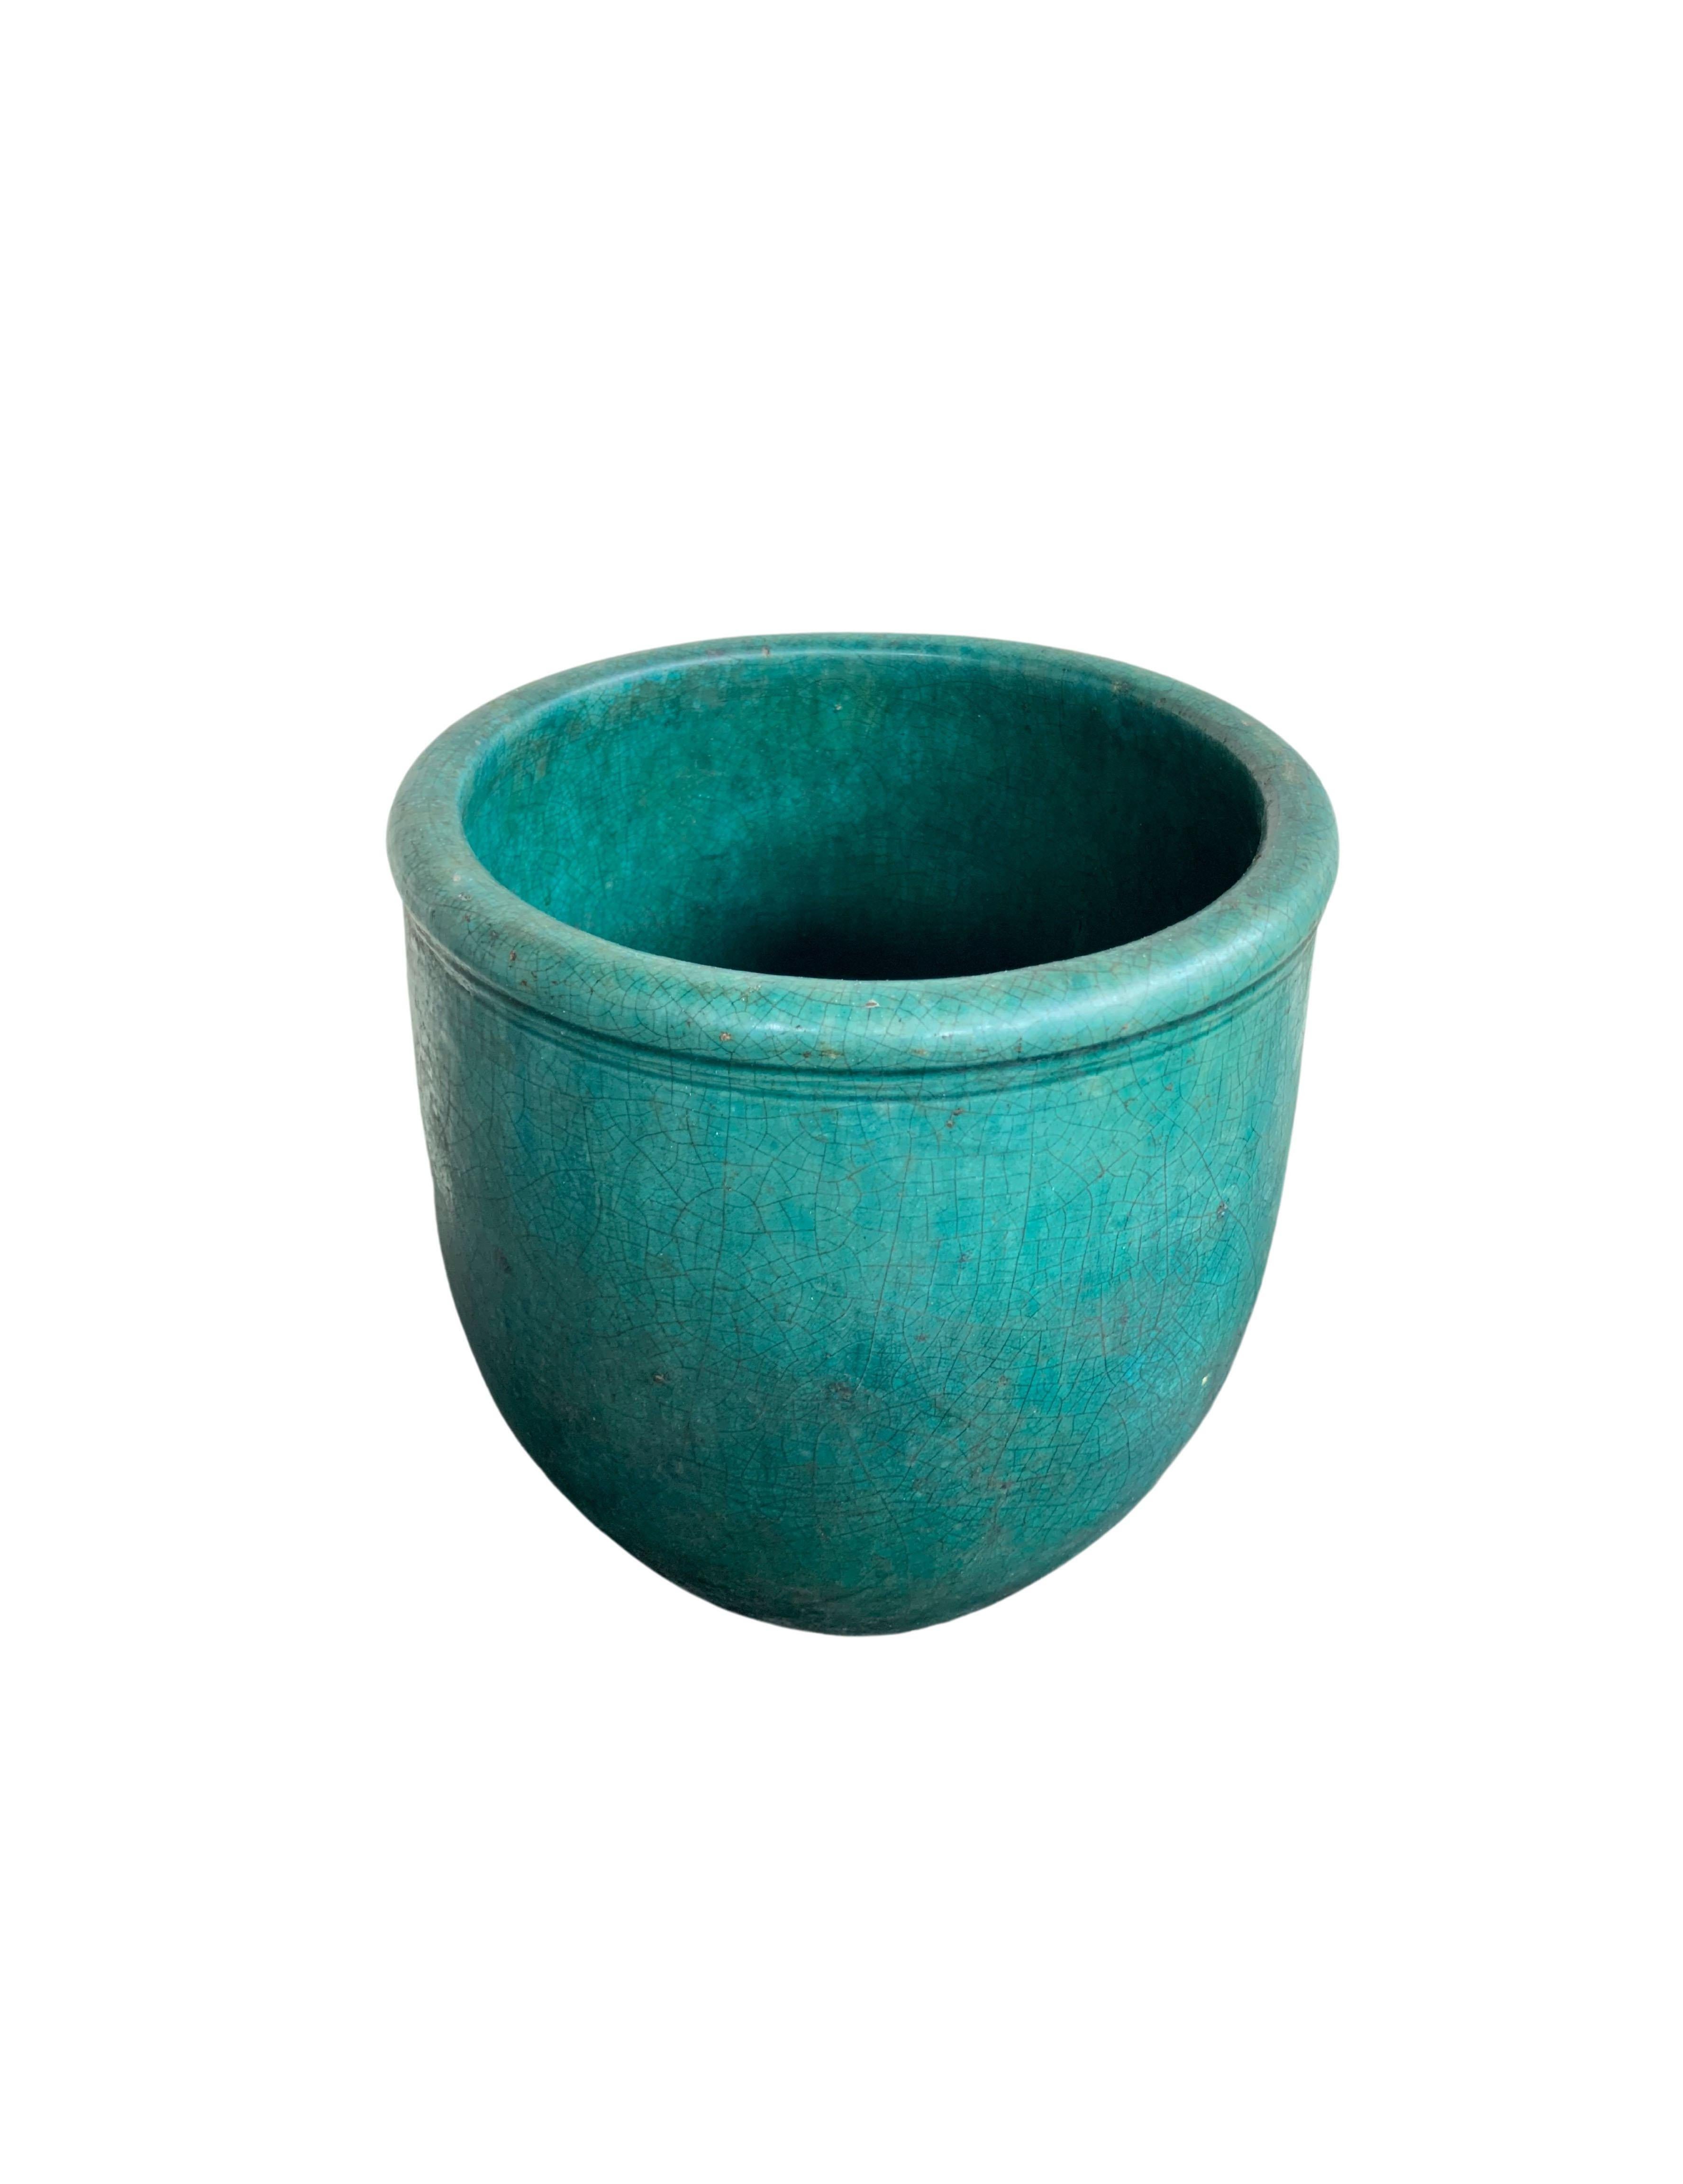 A wonderful blue-green glaze adorns this early 20th Century Chinese storage jar along with a stunning crackled finish. Jars such as these would be used to store grains amid people's homes. In the modern-day, this would make for a beautiful